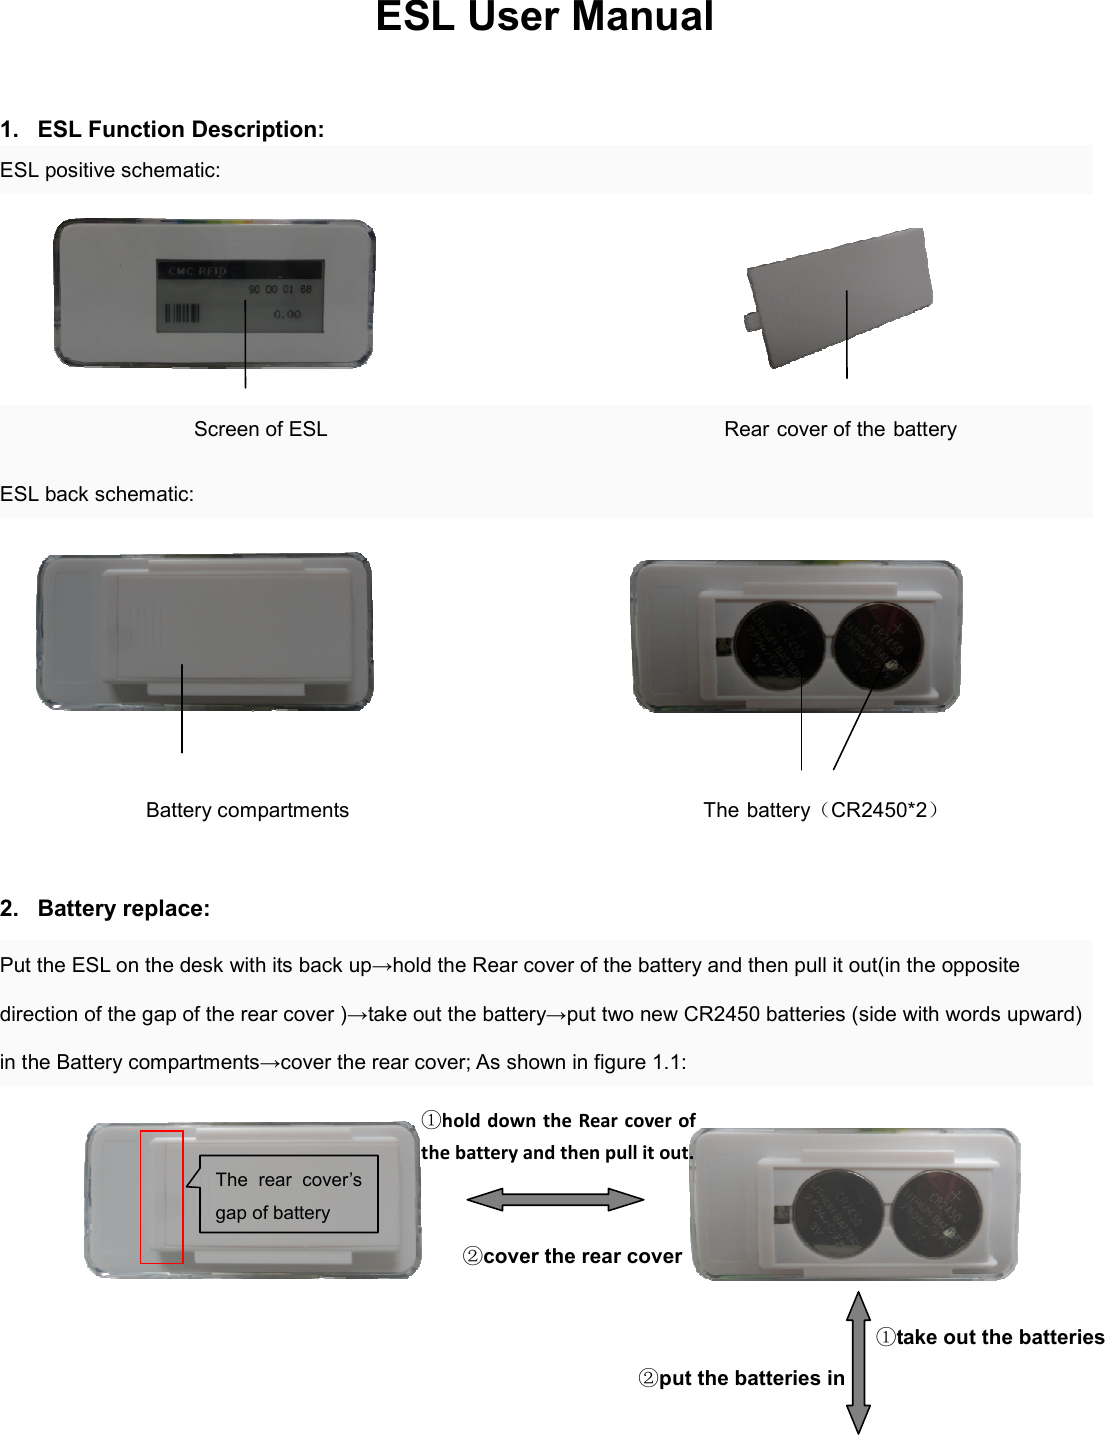 ESL User Manual    1.  ESL Function Description: ESL positive schematic:                                                      Screen of ESL                                      Rear cover of the battery   ESL back schematic:                                                         Battery compartments                                                                    The battery（CR2450*2）  2.  Battery replace: Put the ESL on the desk with its back up→hold the Rear cover of the battery and then pull it out(in the opposite direction of the gap of the rear cover )→take out the battery→put two new CR2450 batteries (side with words upward) in the Battery compartments→cover the rear cover; As shown in figure 1.1:                                      The  rear  cover’s gap of battery ①hold down the Rear cover of the battery and then pull it out. ②cover the rear cover ②put the batteries in  ①take out the batteries 